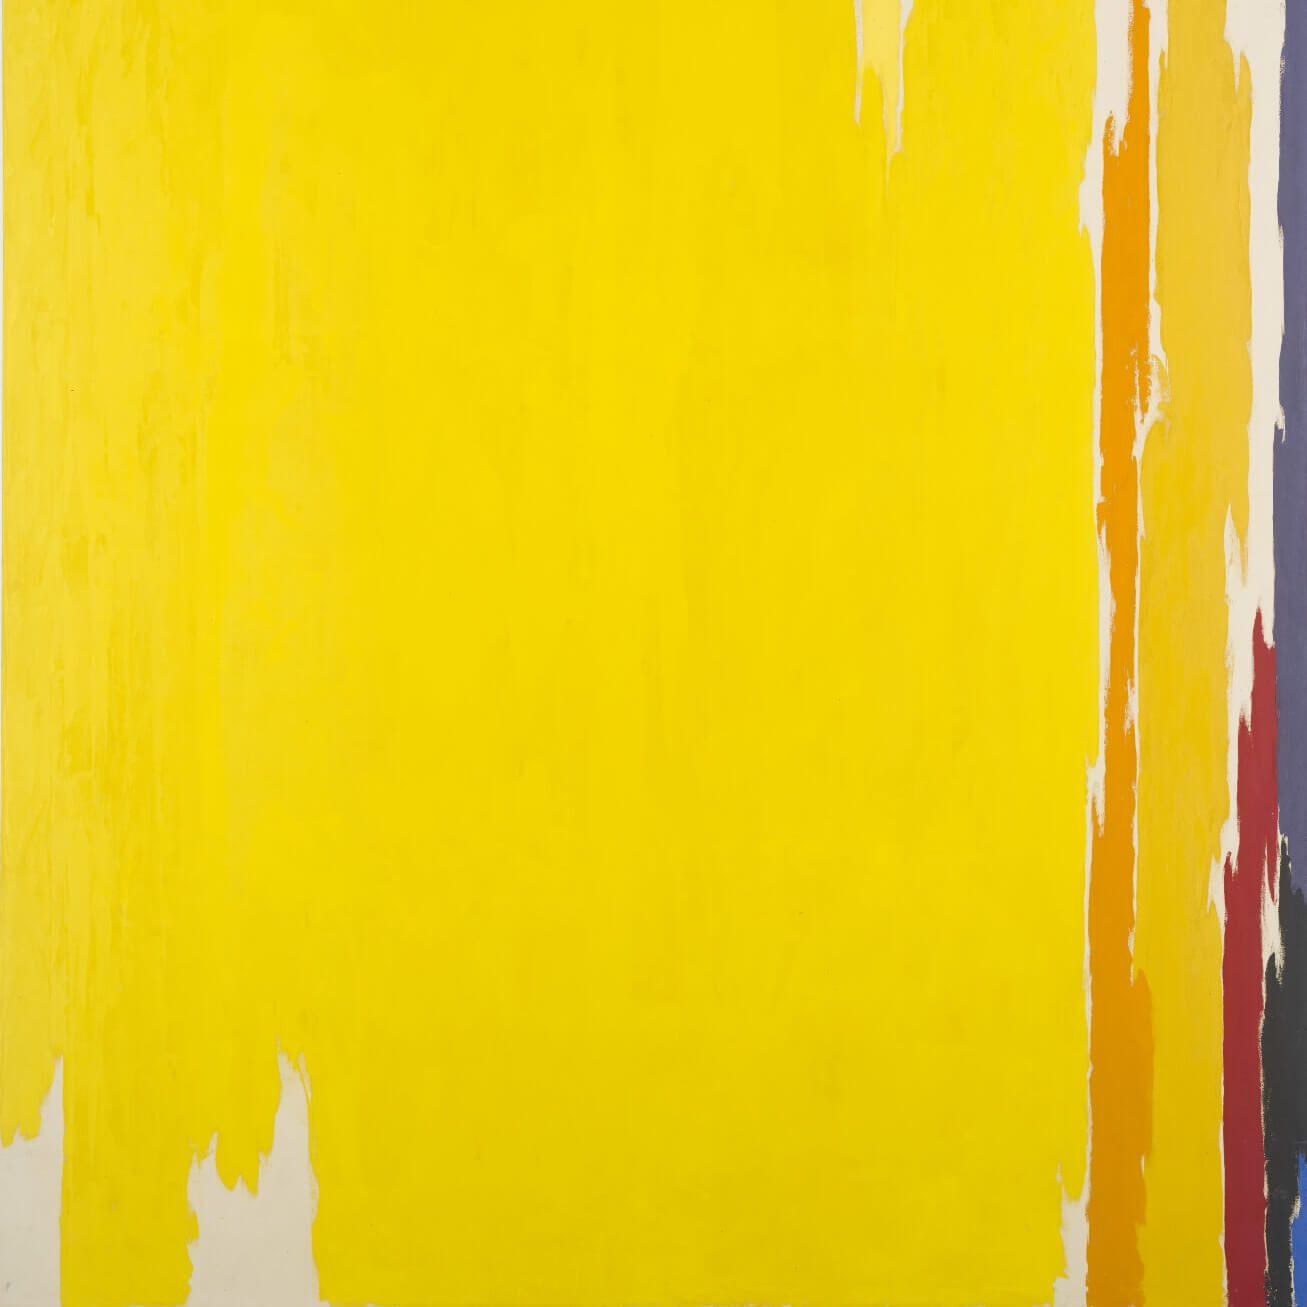 Large yellow abstract painting with small streaks of orange, red, purple and white on one edge